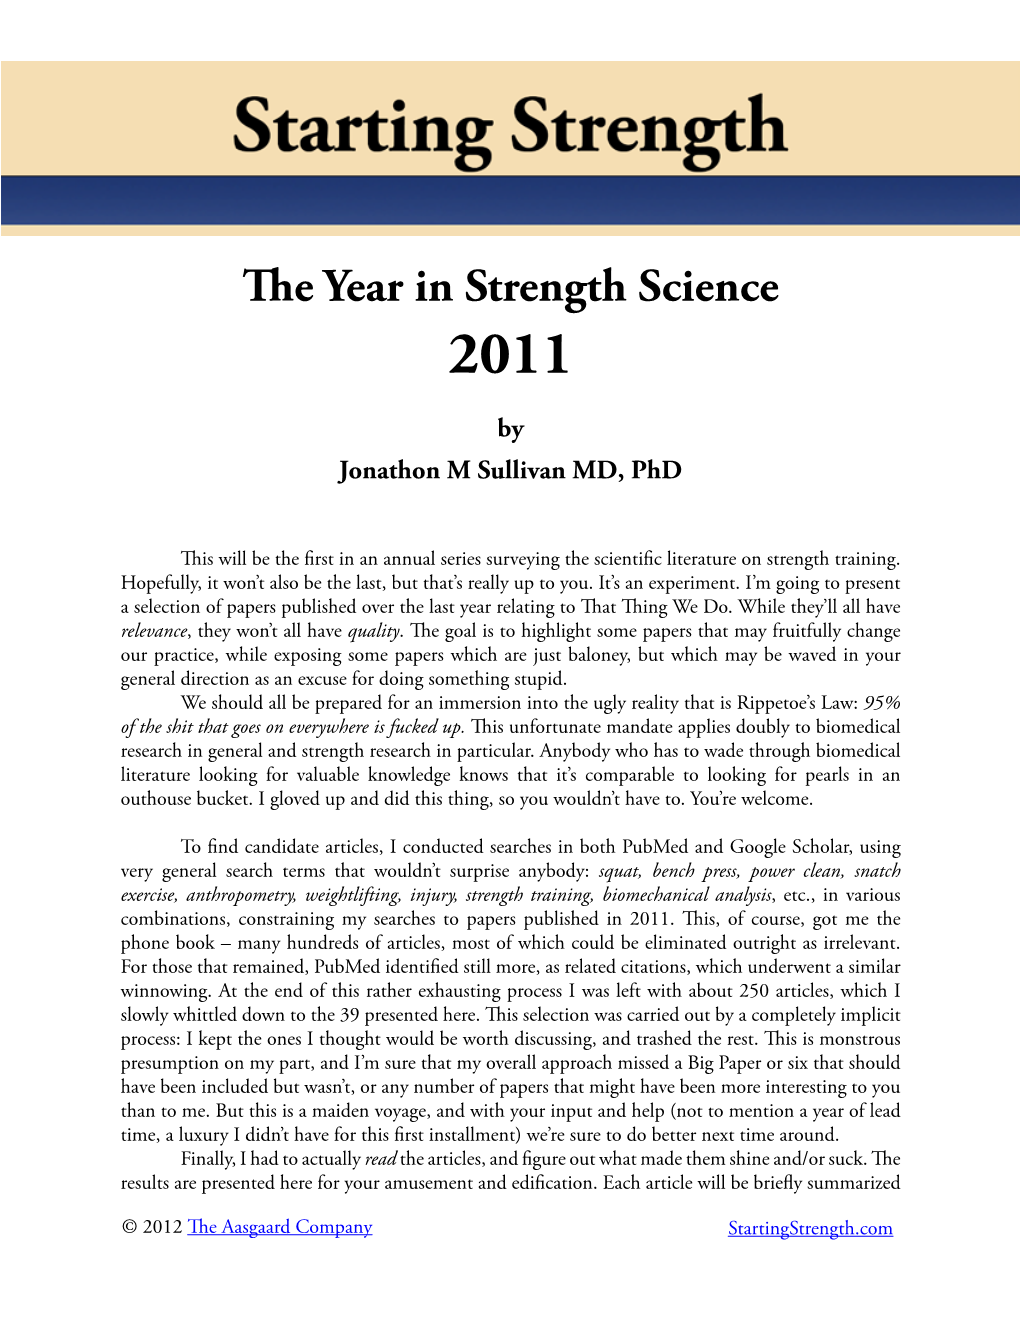 The Year in Strength Science 2011